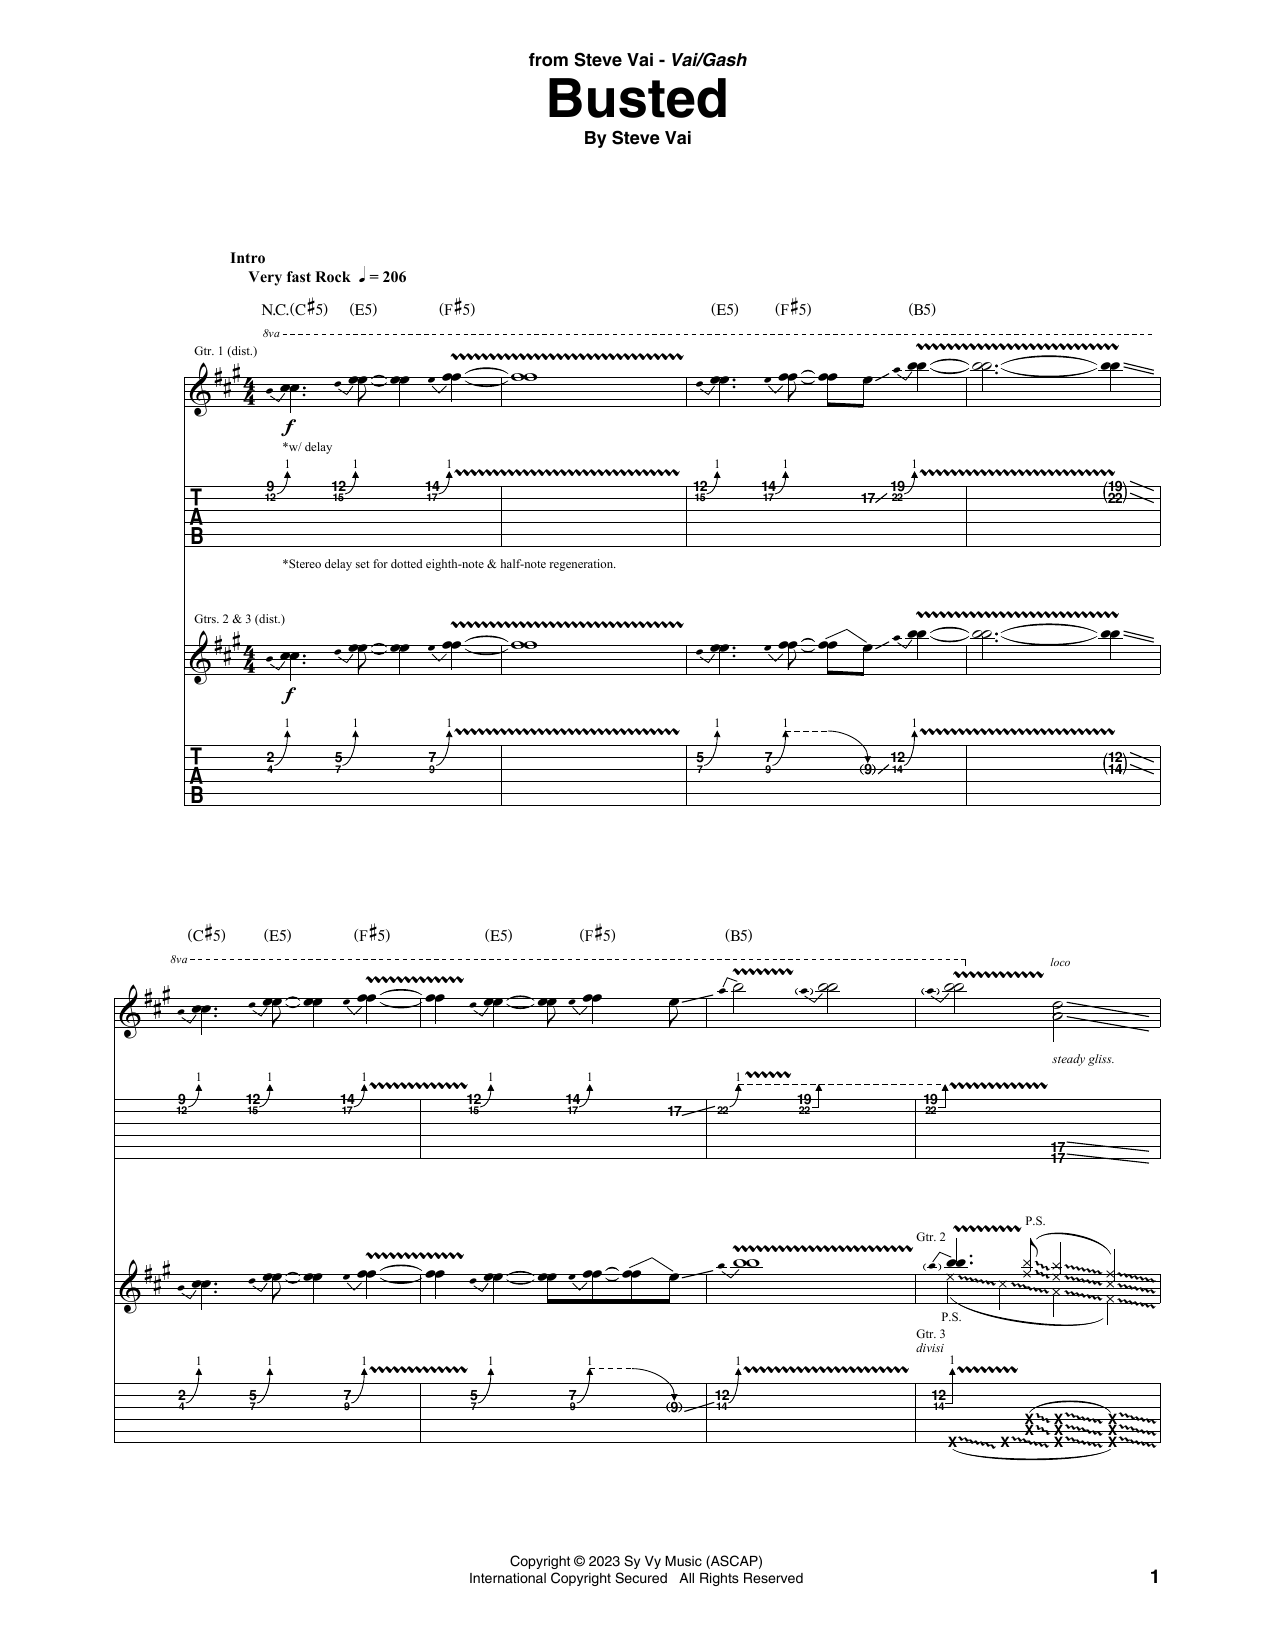 Download Steve Vai Busted Sheet Music